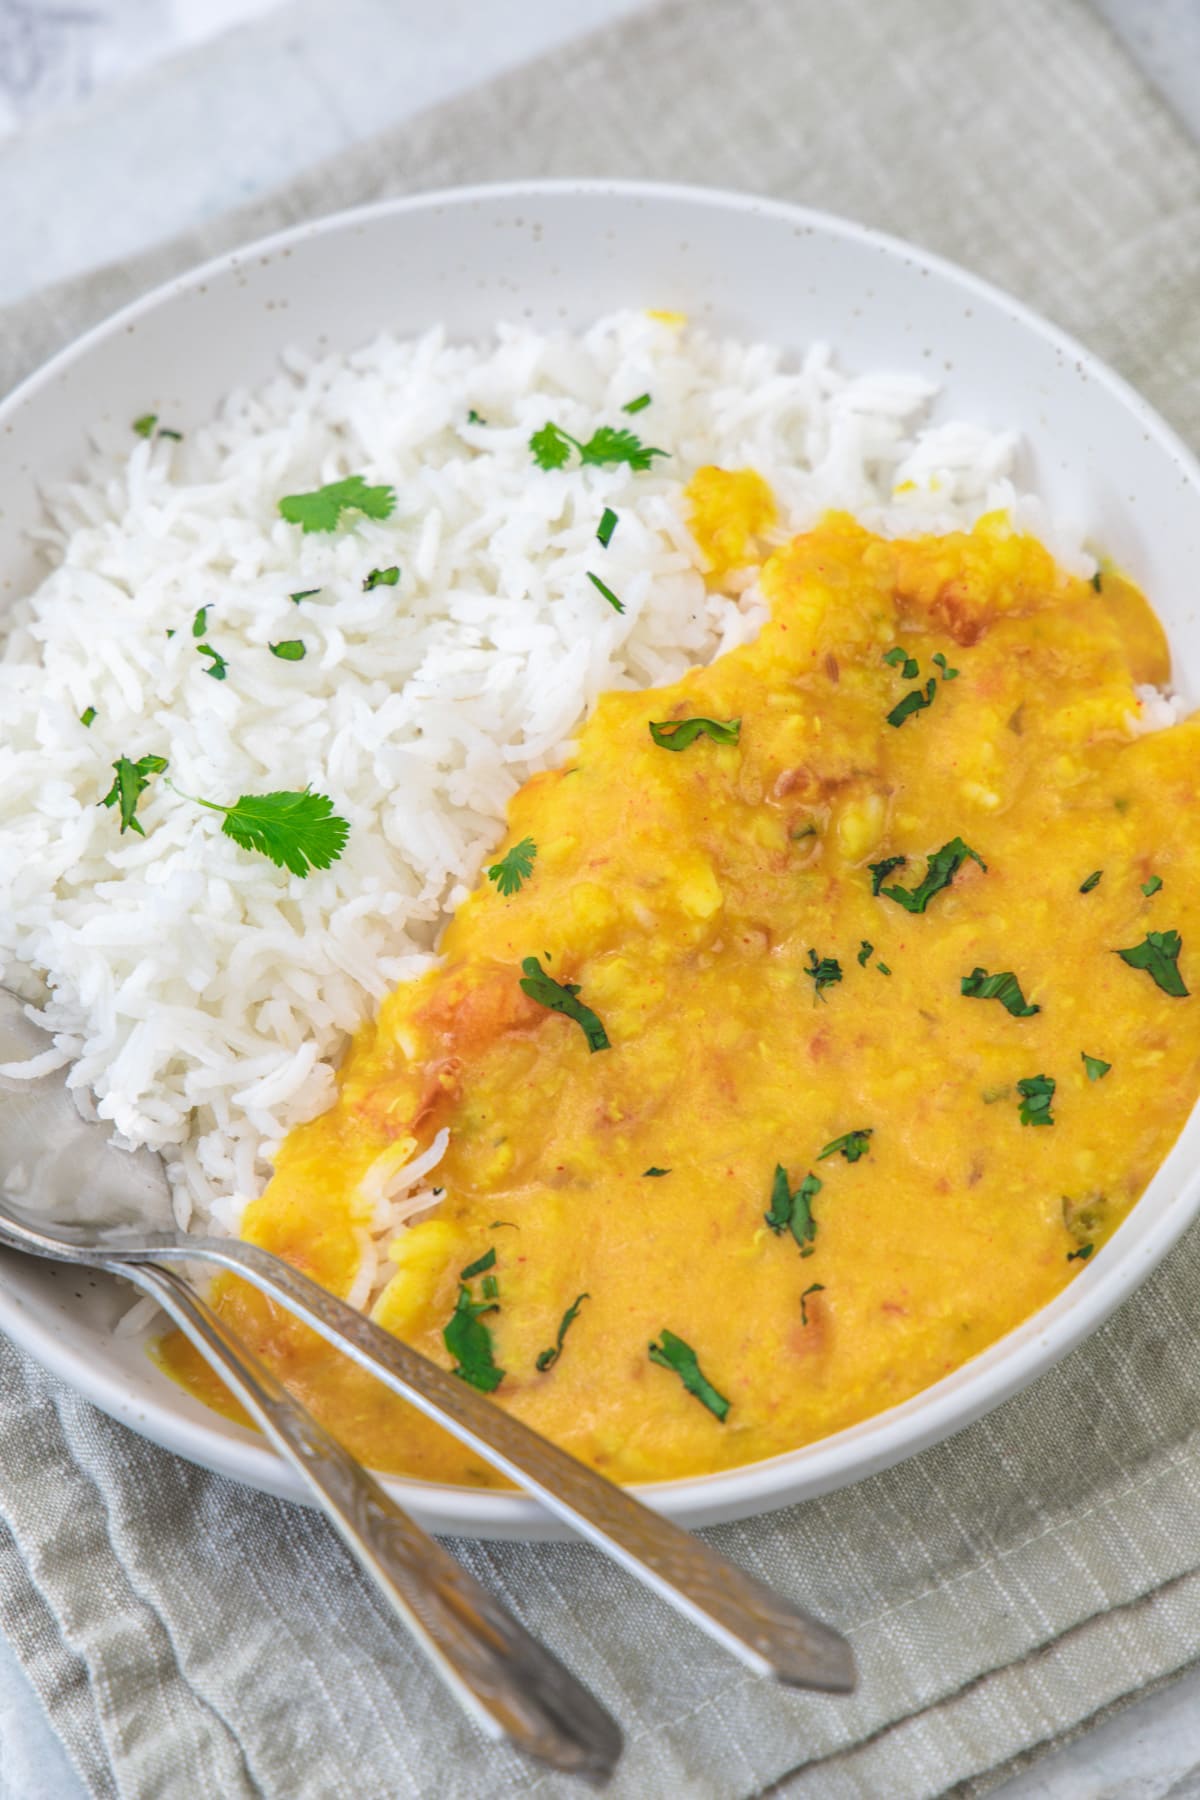 Moong dal served with rice in a plate garnished with cilantro and two spoond in a plate.